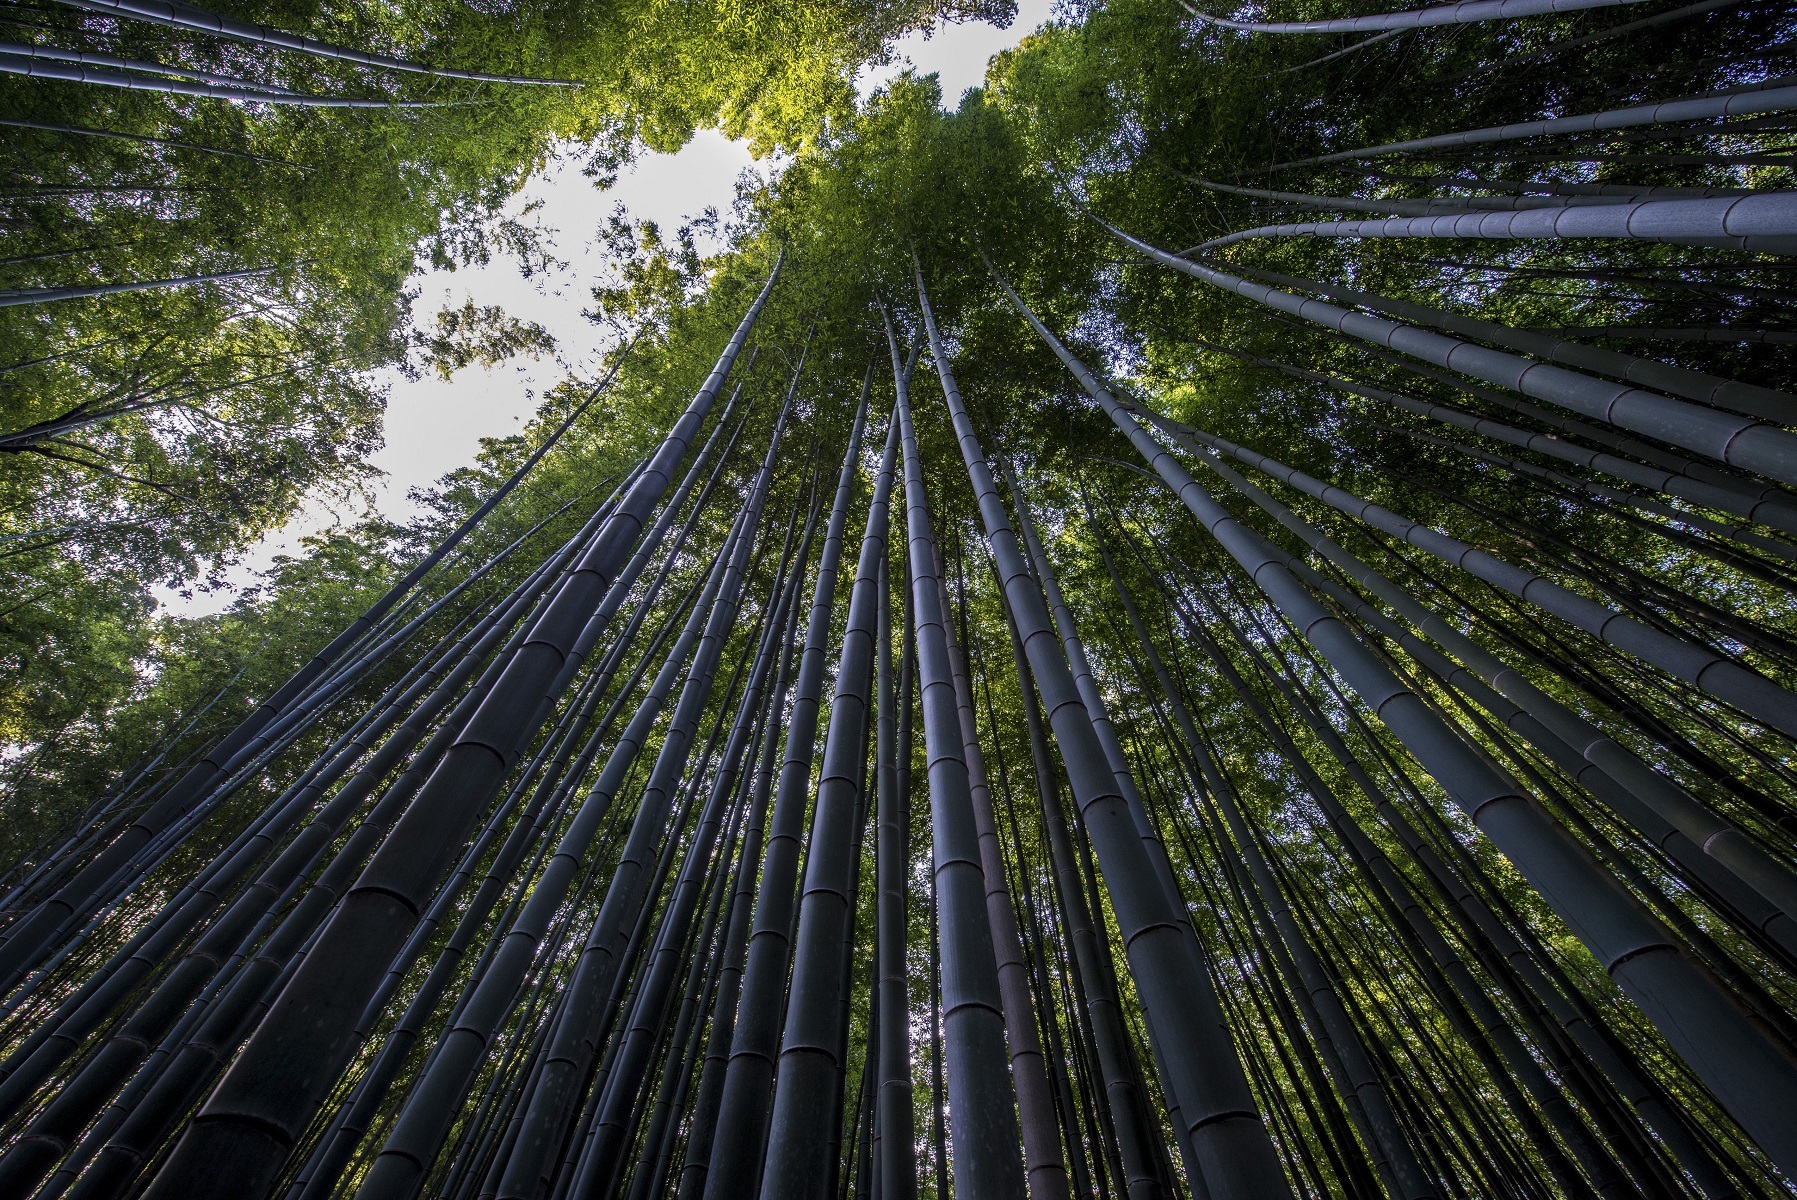 <p>If you’d like to try the Japanese practice of <a href="https://www.nationalgeographic.com/travel/article/forest-bathing-nature-walk-health"><em>shinrin-yoku</em></a> (“forest bathing”), there’s no better place to experience it than Sagano Bamboo Forest on the outskirts of Kyoto. </p><p>The grove’s bamboo trees aren’t just famous for their towering height. The <a href="https://www.youtube.com/watch?v=8Vky3vEL6Dc&ab_channel=SoundofKyoto%2FSoundof%E4%BA%AC%E9%83%BD">sound</a> of their gentle swaying was included on the <a href="https://www.cnn.com/travel/article/sagano-bamboo-forest/index.html">100 Soundscapes of Japan</a> list by the country’s Ministry of Environment. </p><p>If you can escape the crowds, take a moment to listen to this unique and soothing sound. </p>